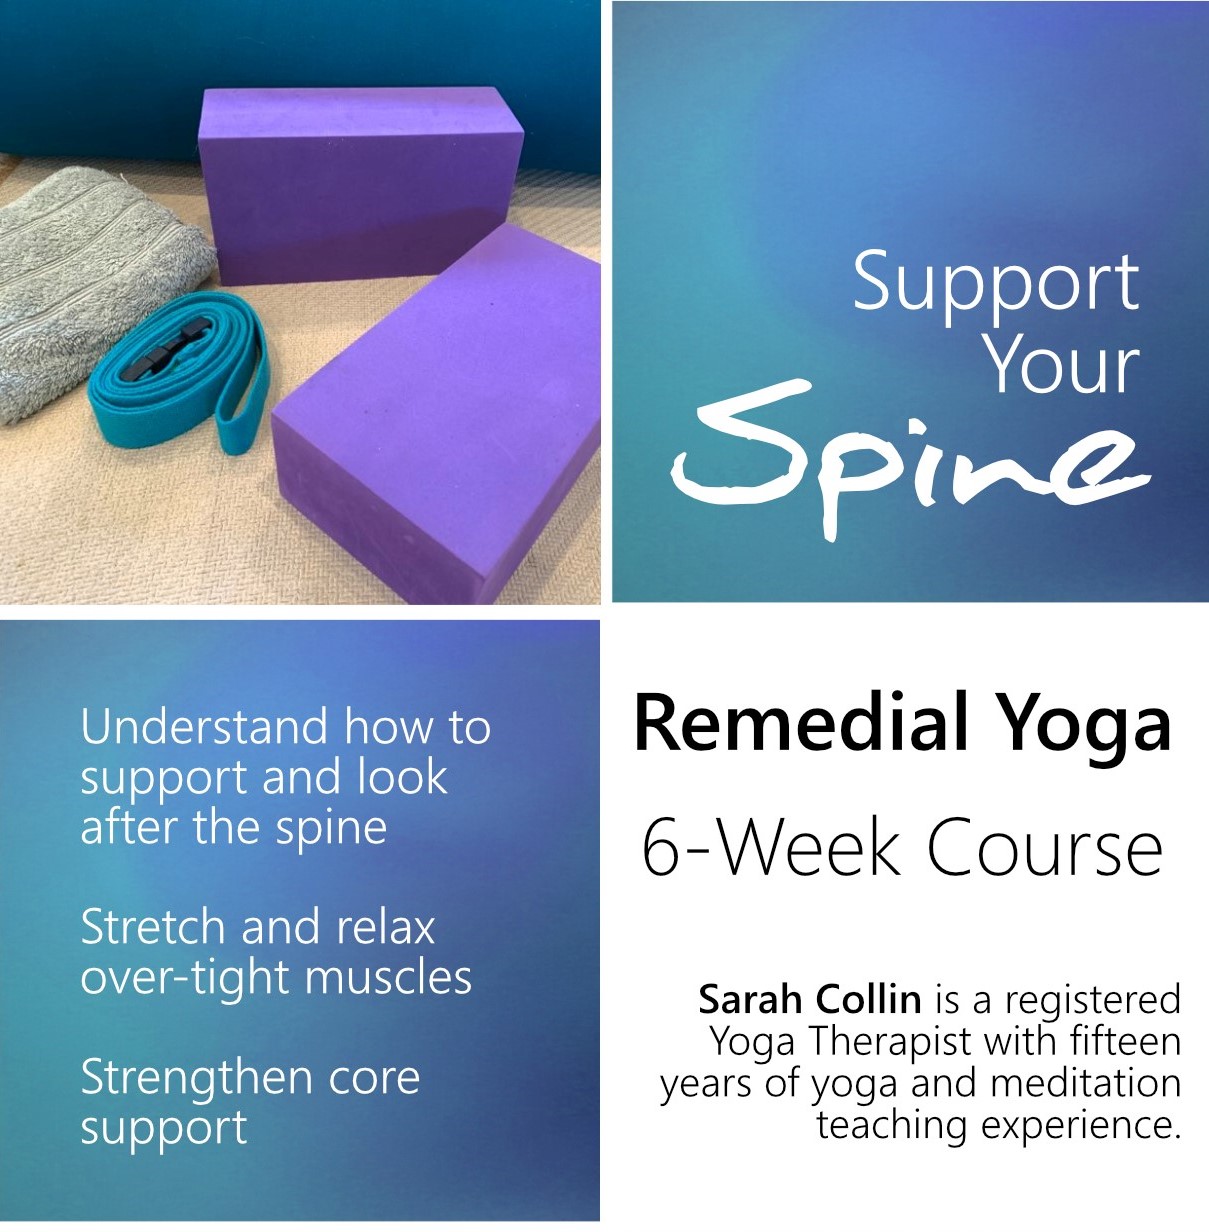 Support Your Spine: Remedial Yoga 6 Week Course.